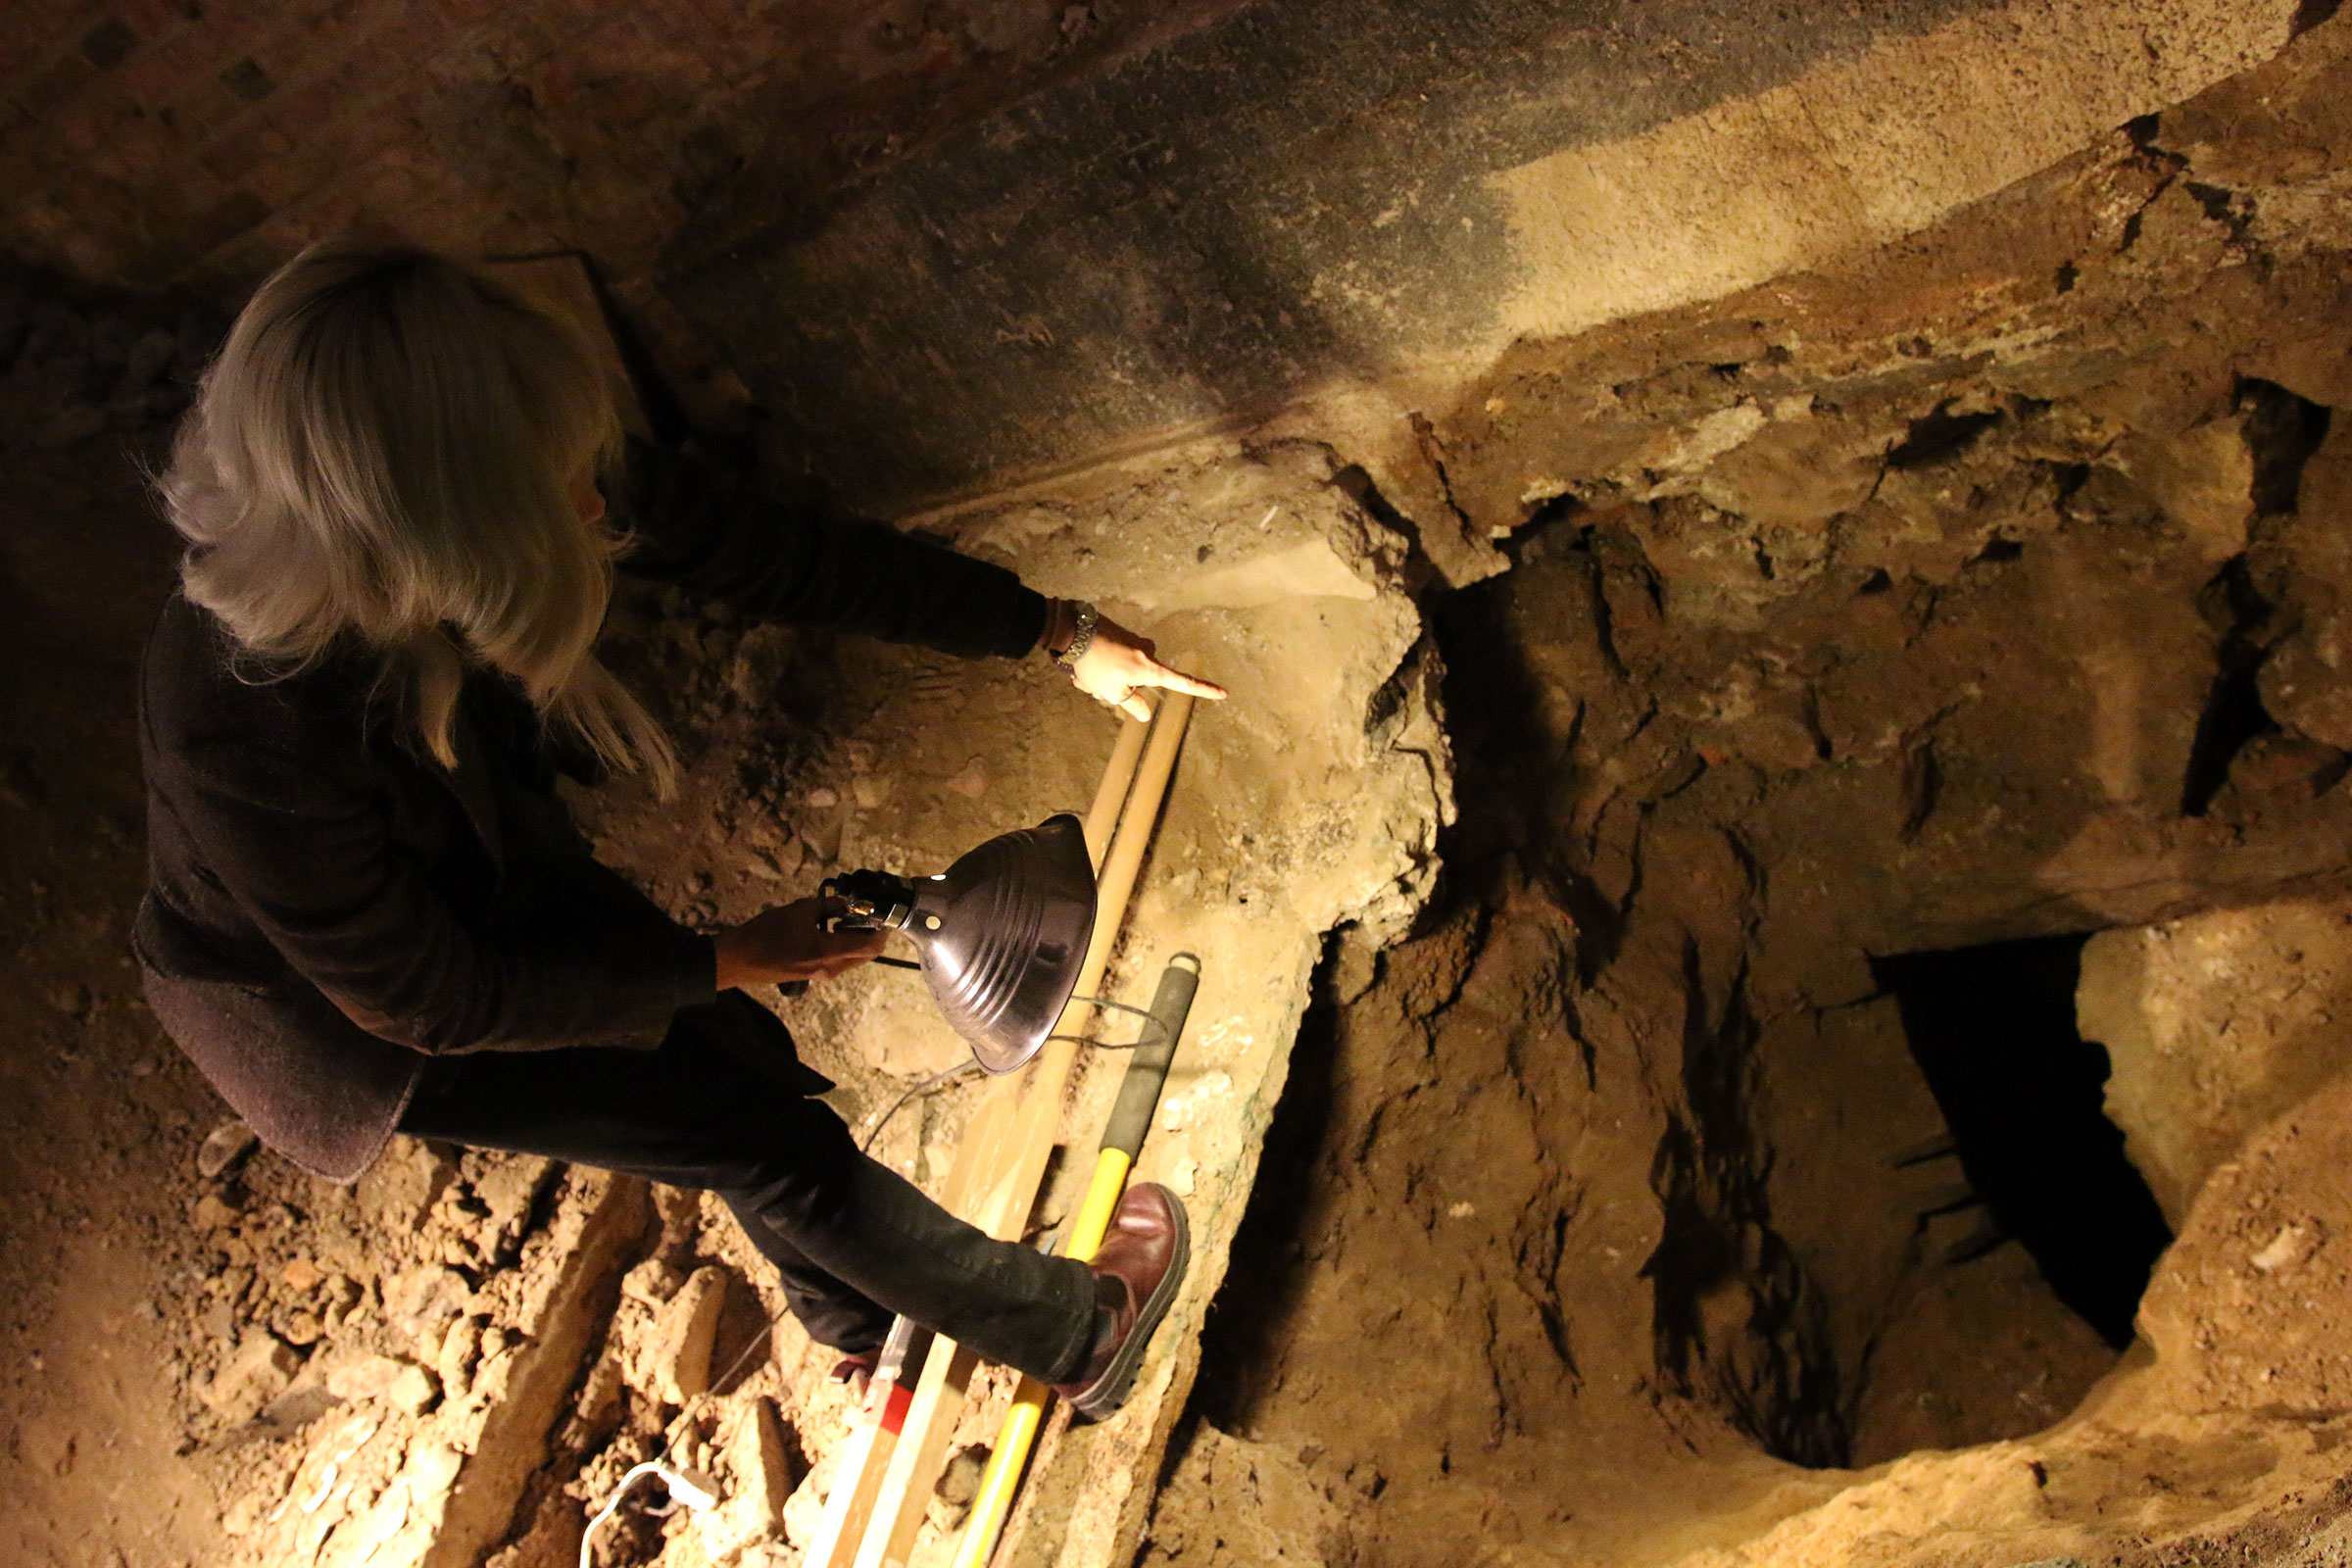 Melissa Dunphy standing next to a deep hole in the ground which once was a privy.